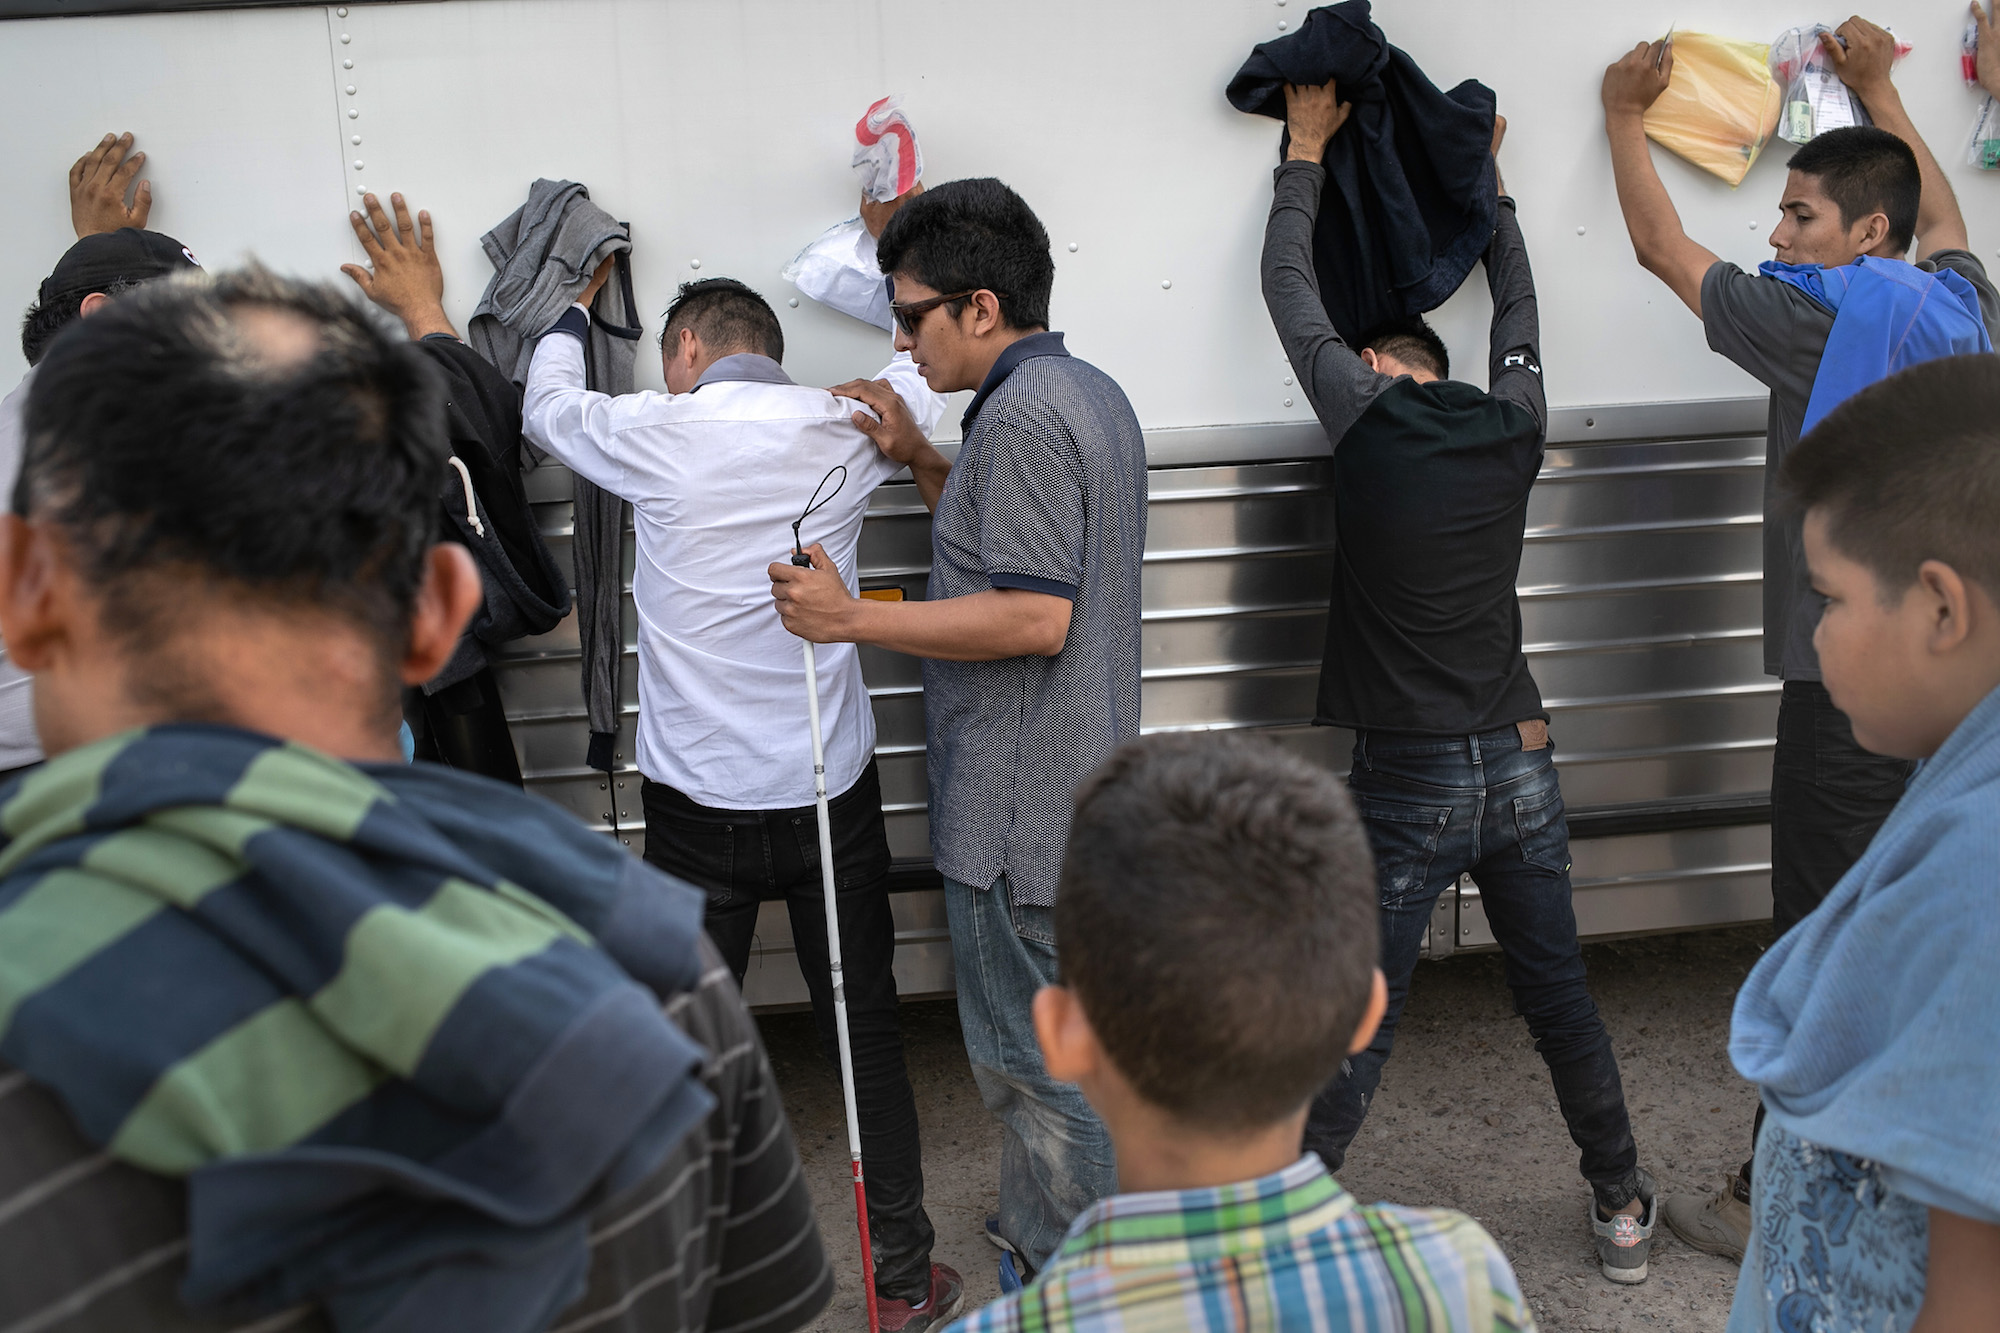 Immigrants, including a blind man from El Salvador (C), wait to be searched and then bussed to U.S. Border Patrol facility in McAllen after crossing the border from Mexico on July 02, 2019 in Los Ebanos, Texas. Photo: John Moore/Getty Images.